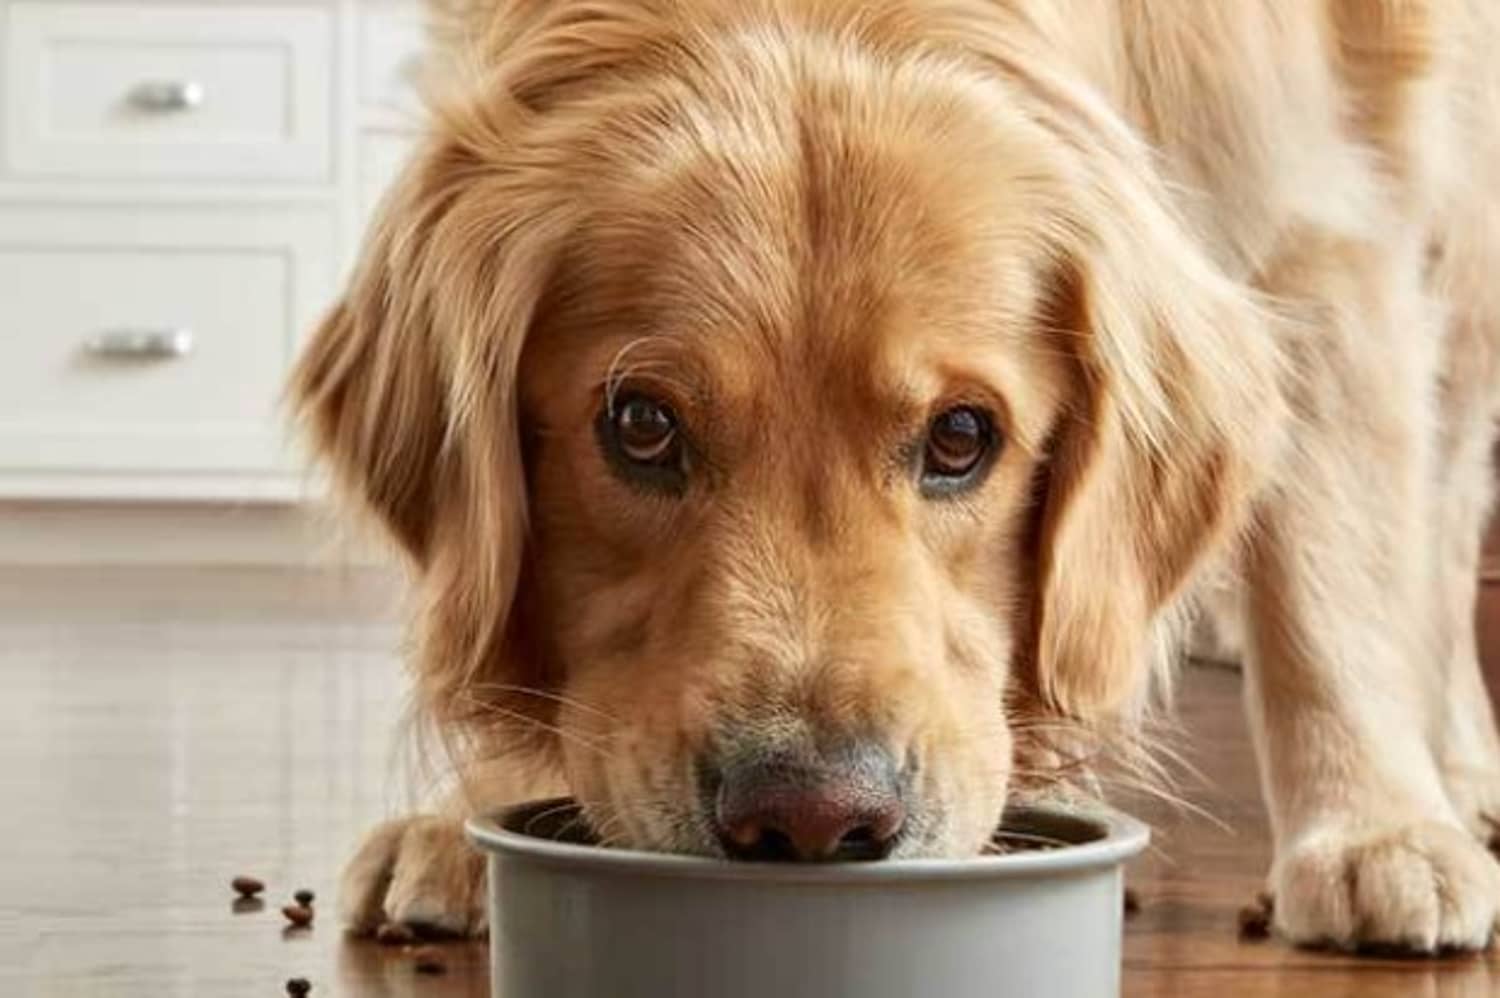 Golden Retriever dog eating from a round silver bowl